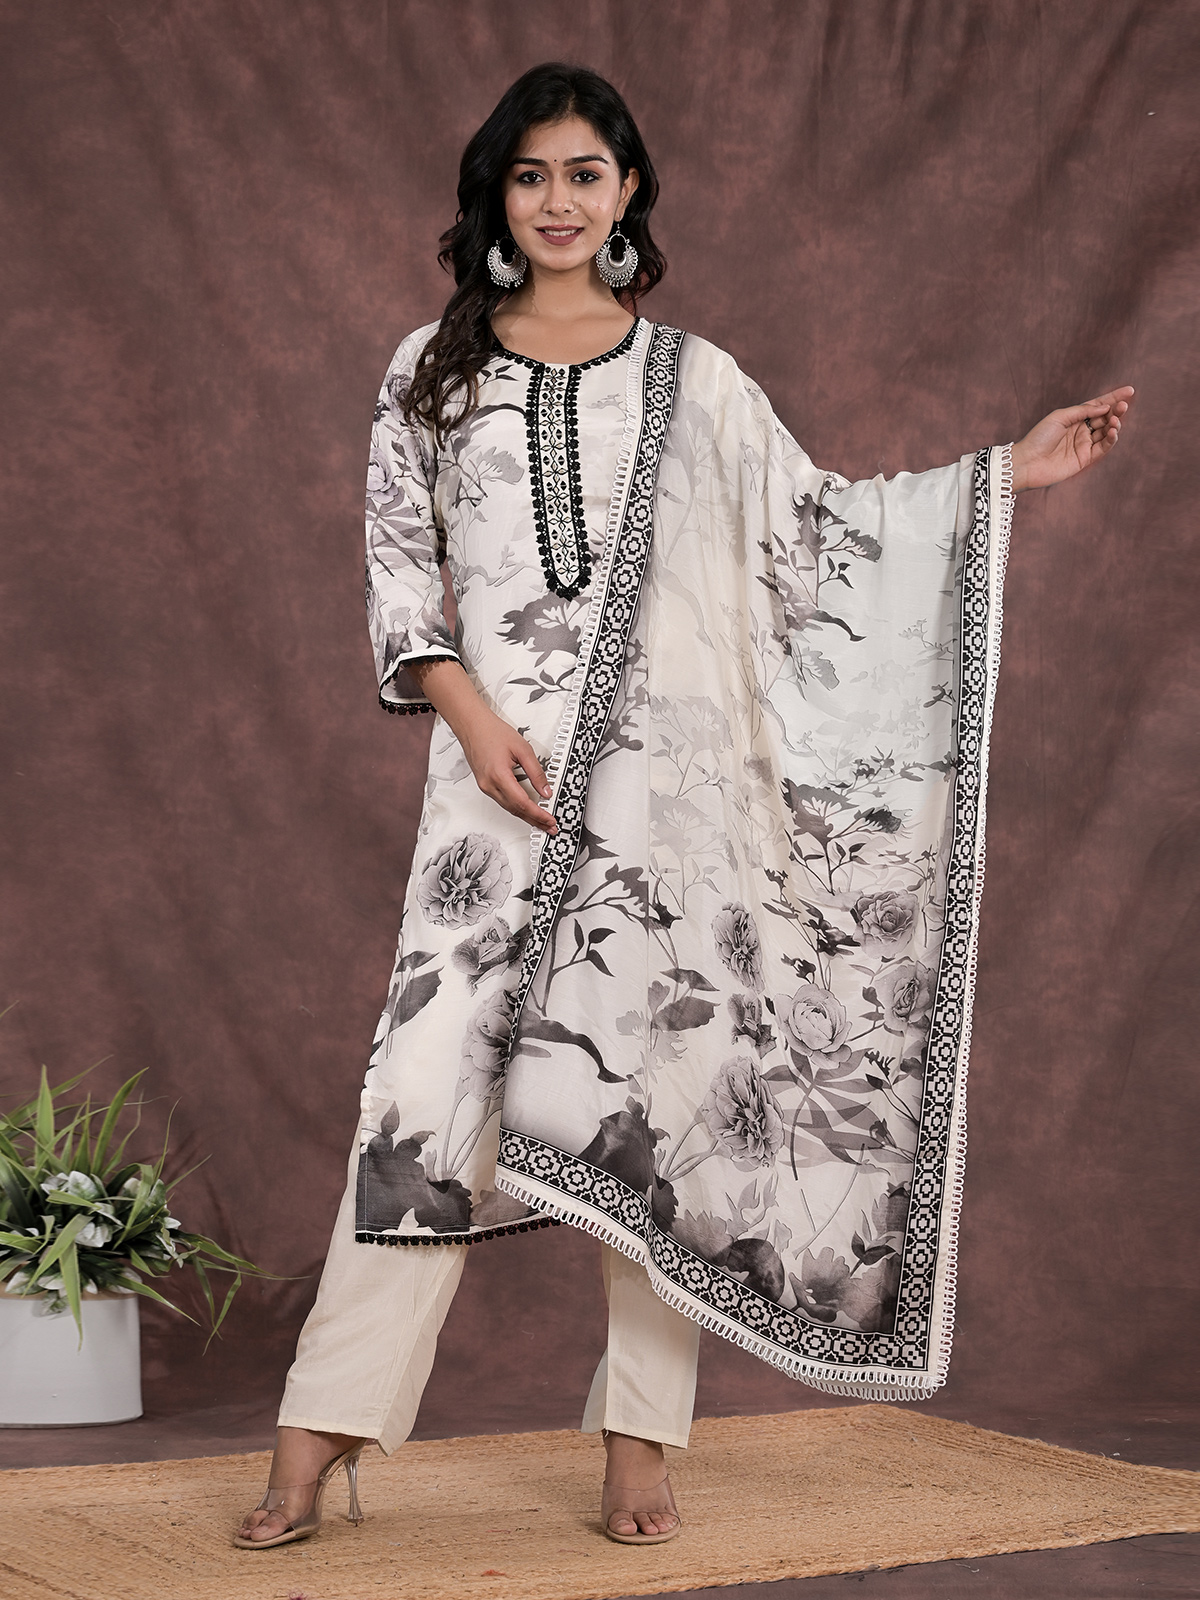 Long White Cotton Kurti With Belt And Bell Sleeves | Latest Kurti Designs